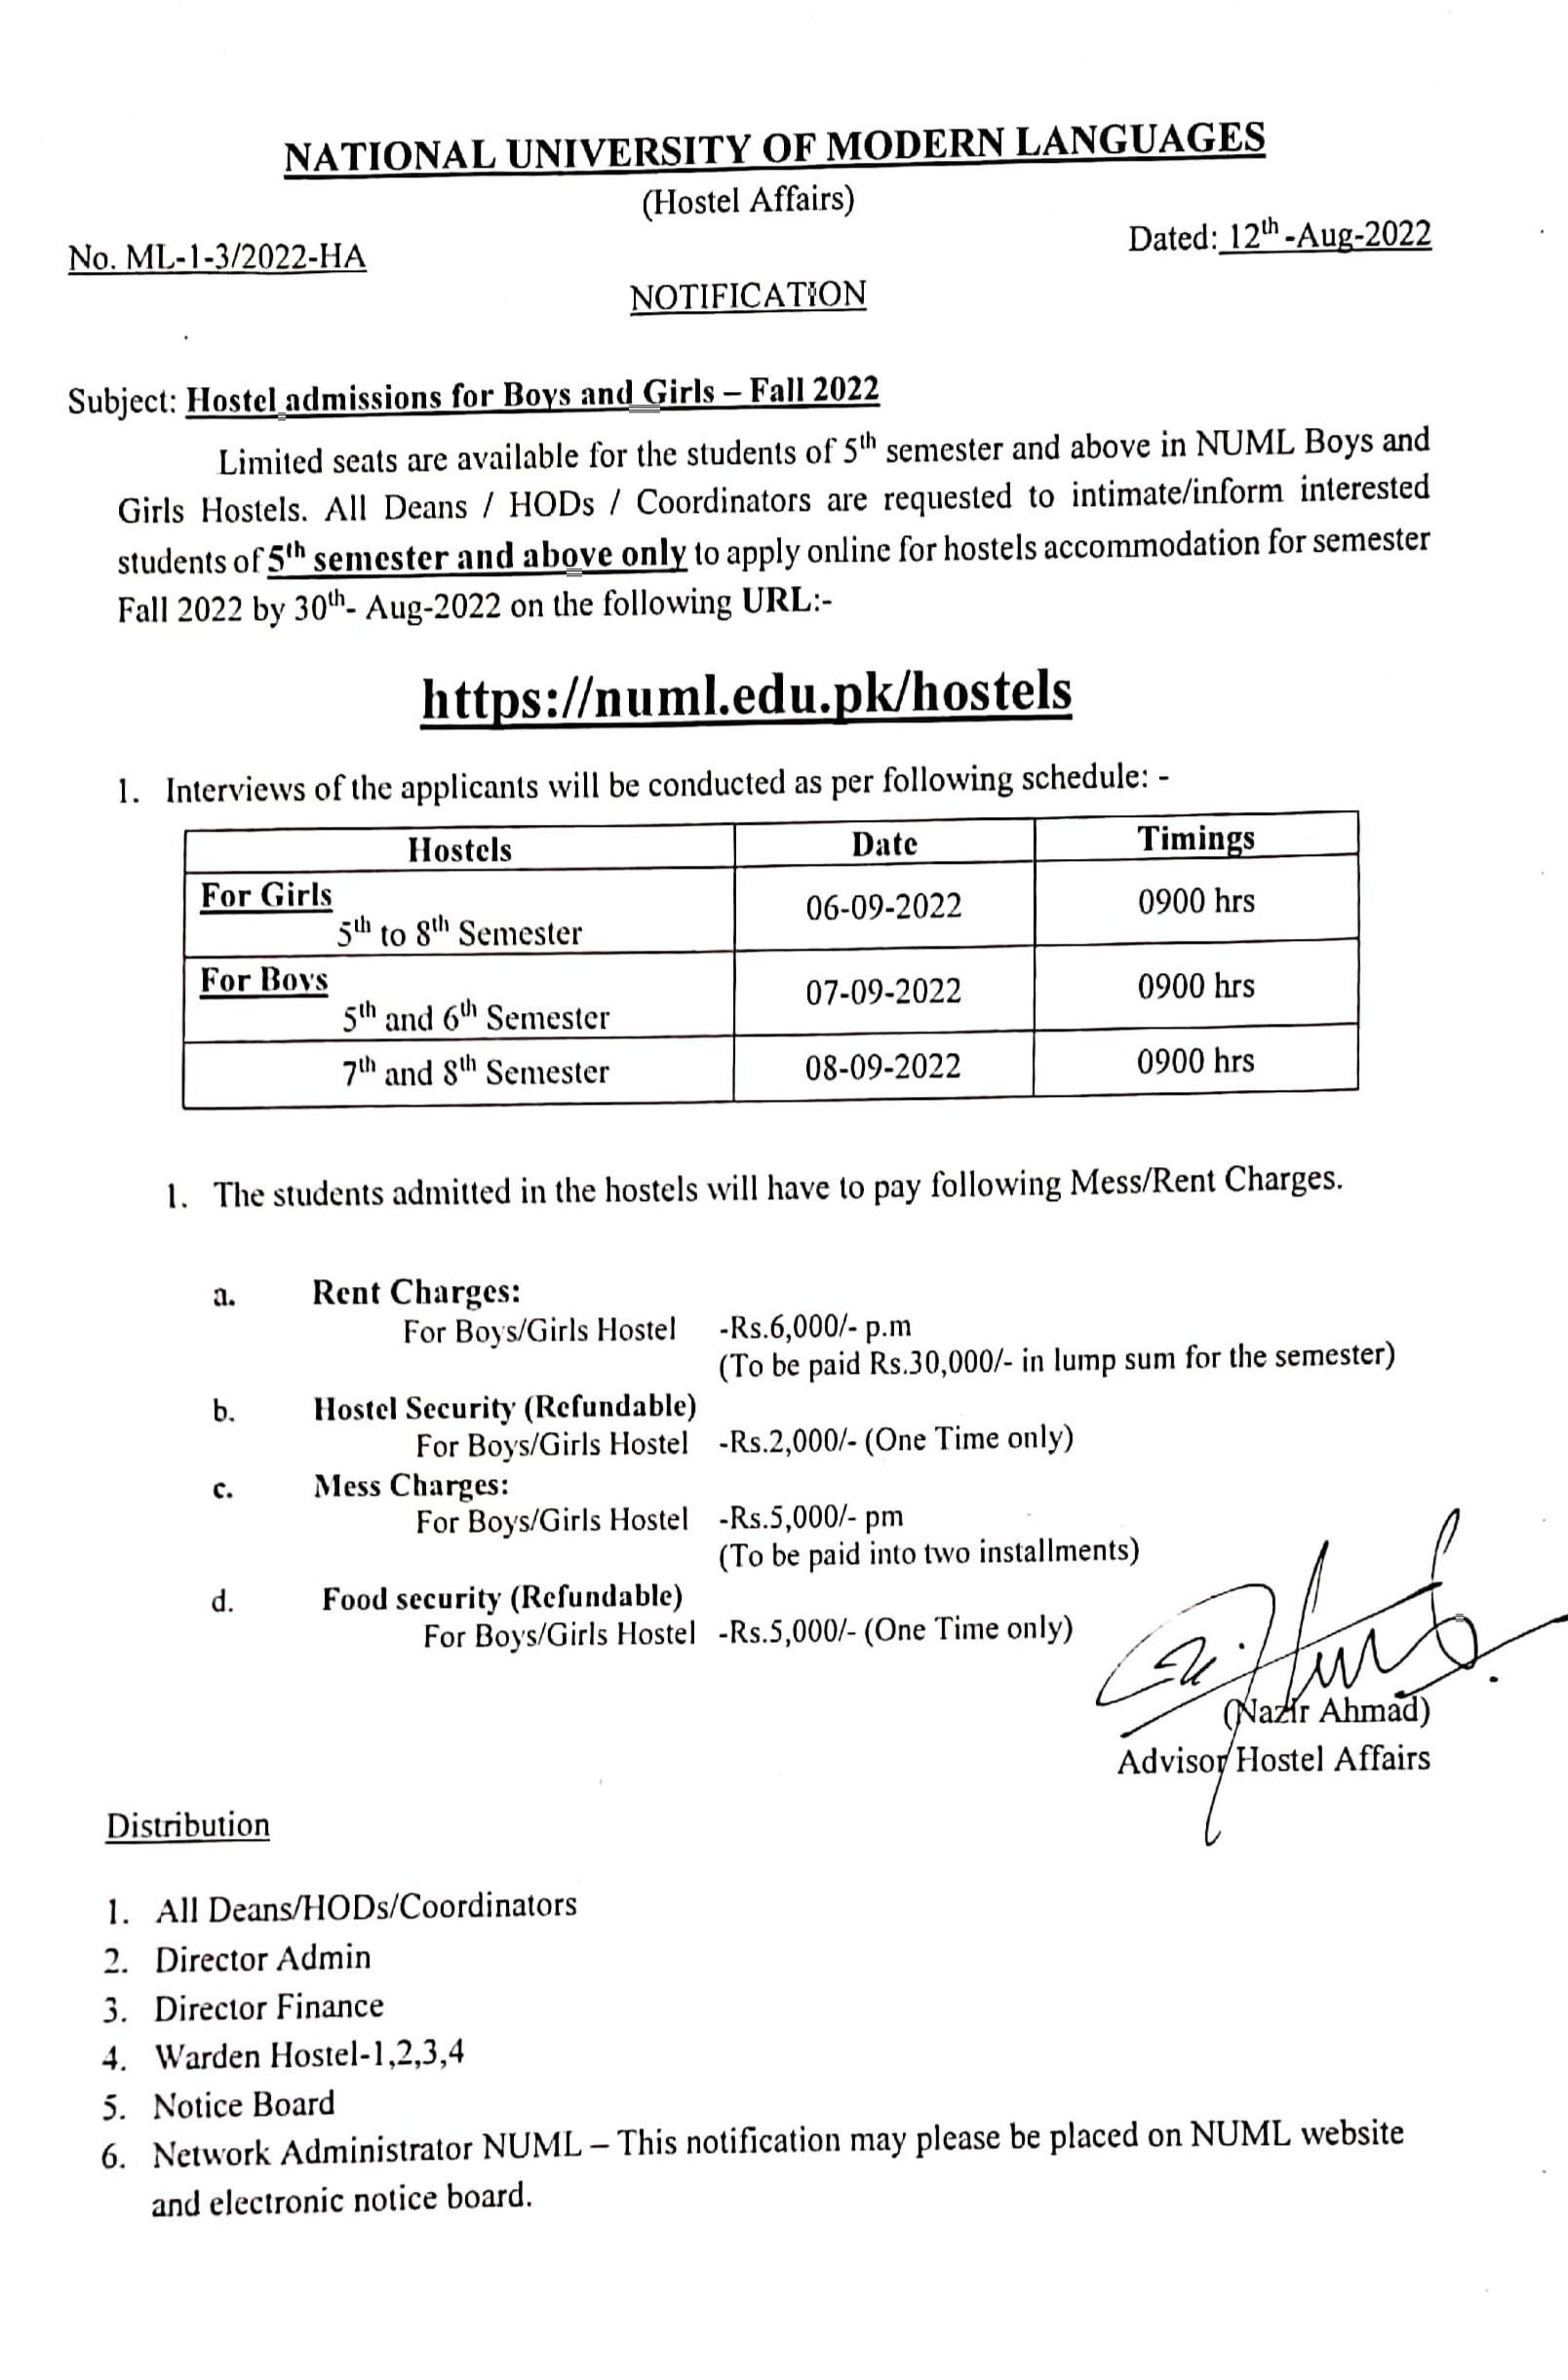 Hostel Admissions for Boys and Girls - Fall 2022